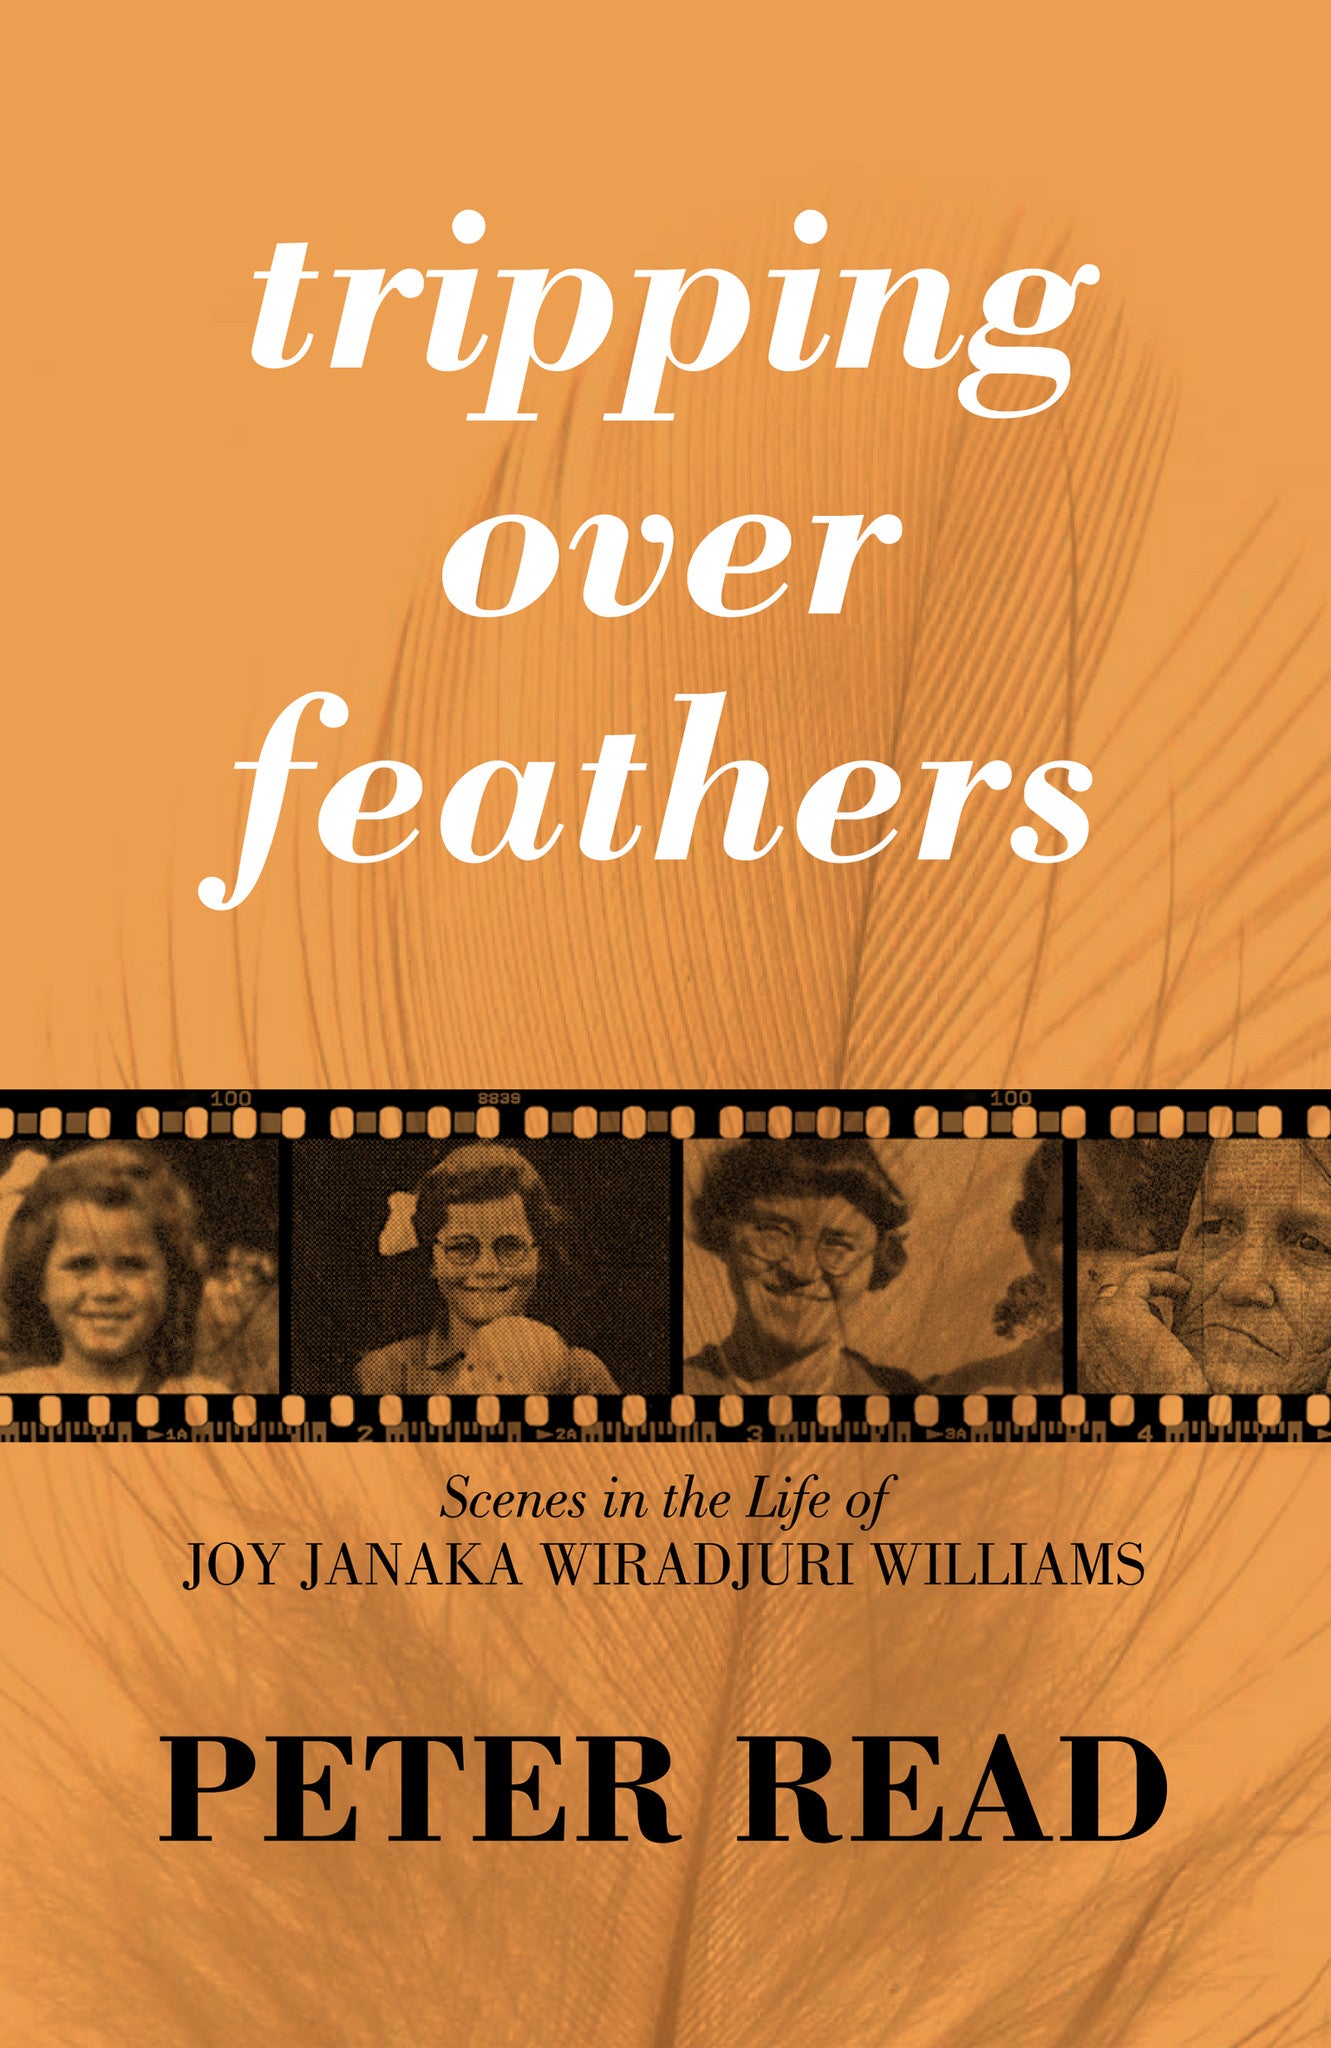 Tripping Over Feathers: Scenes in the Life of Joy Janaka Wiradjuri Williams